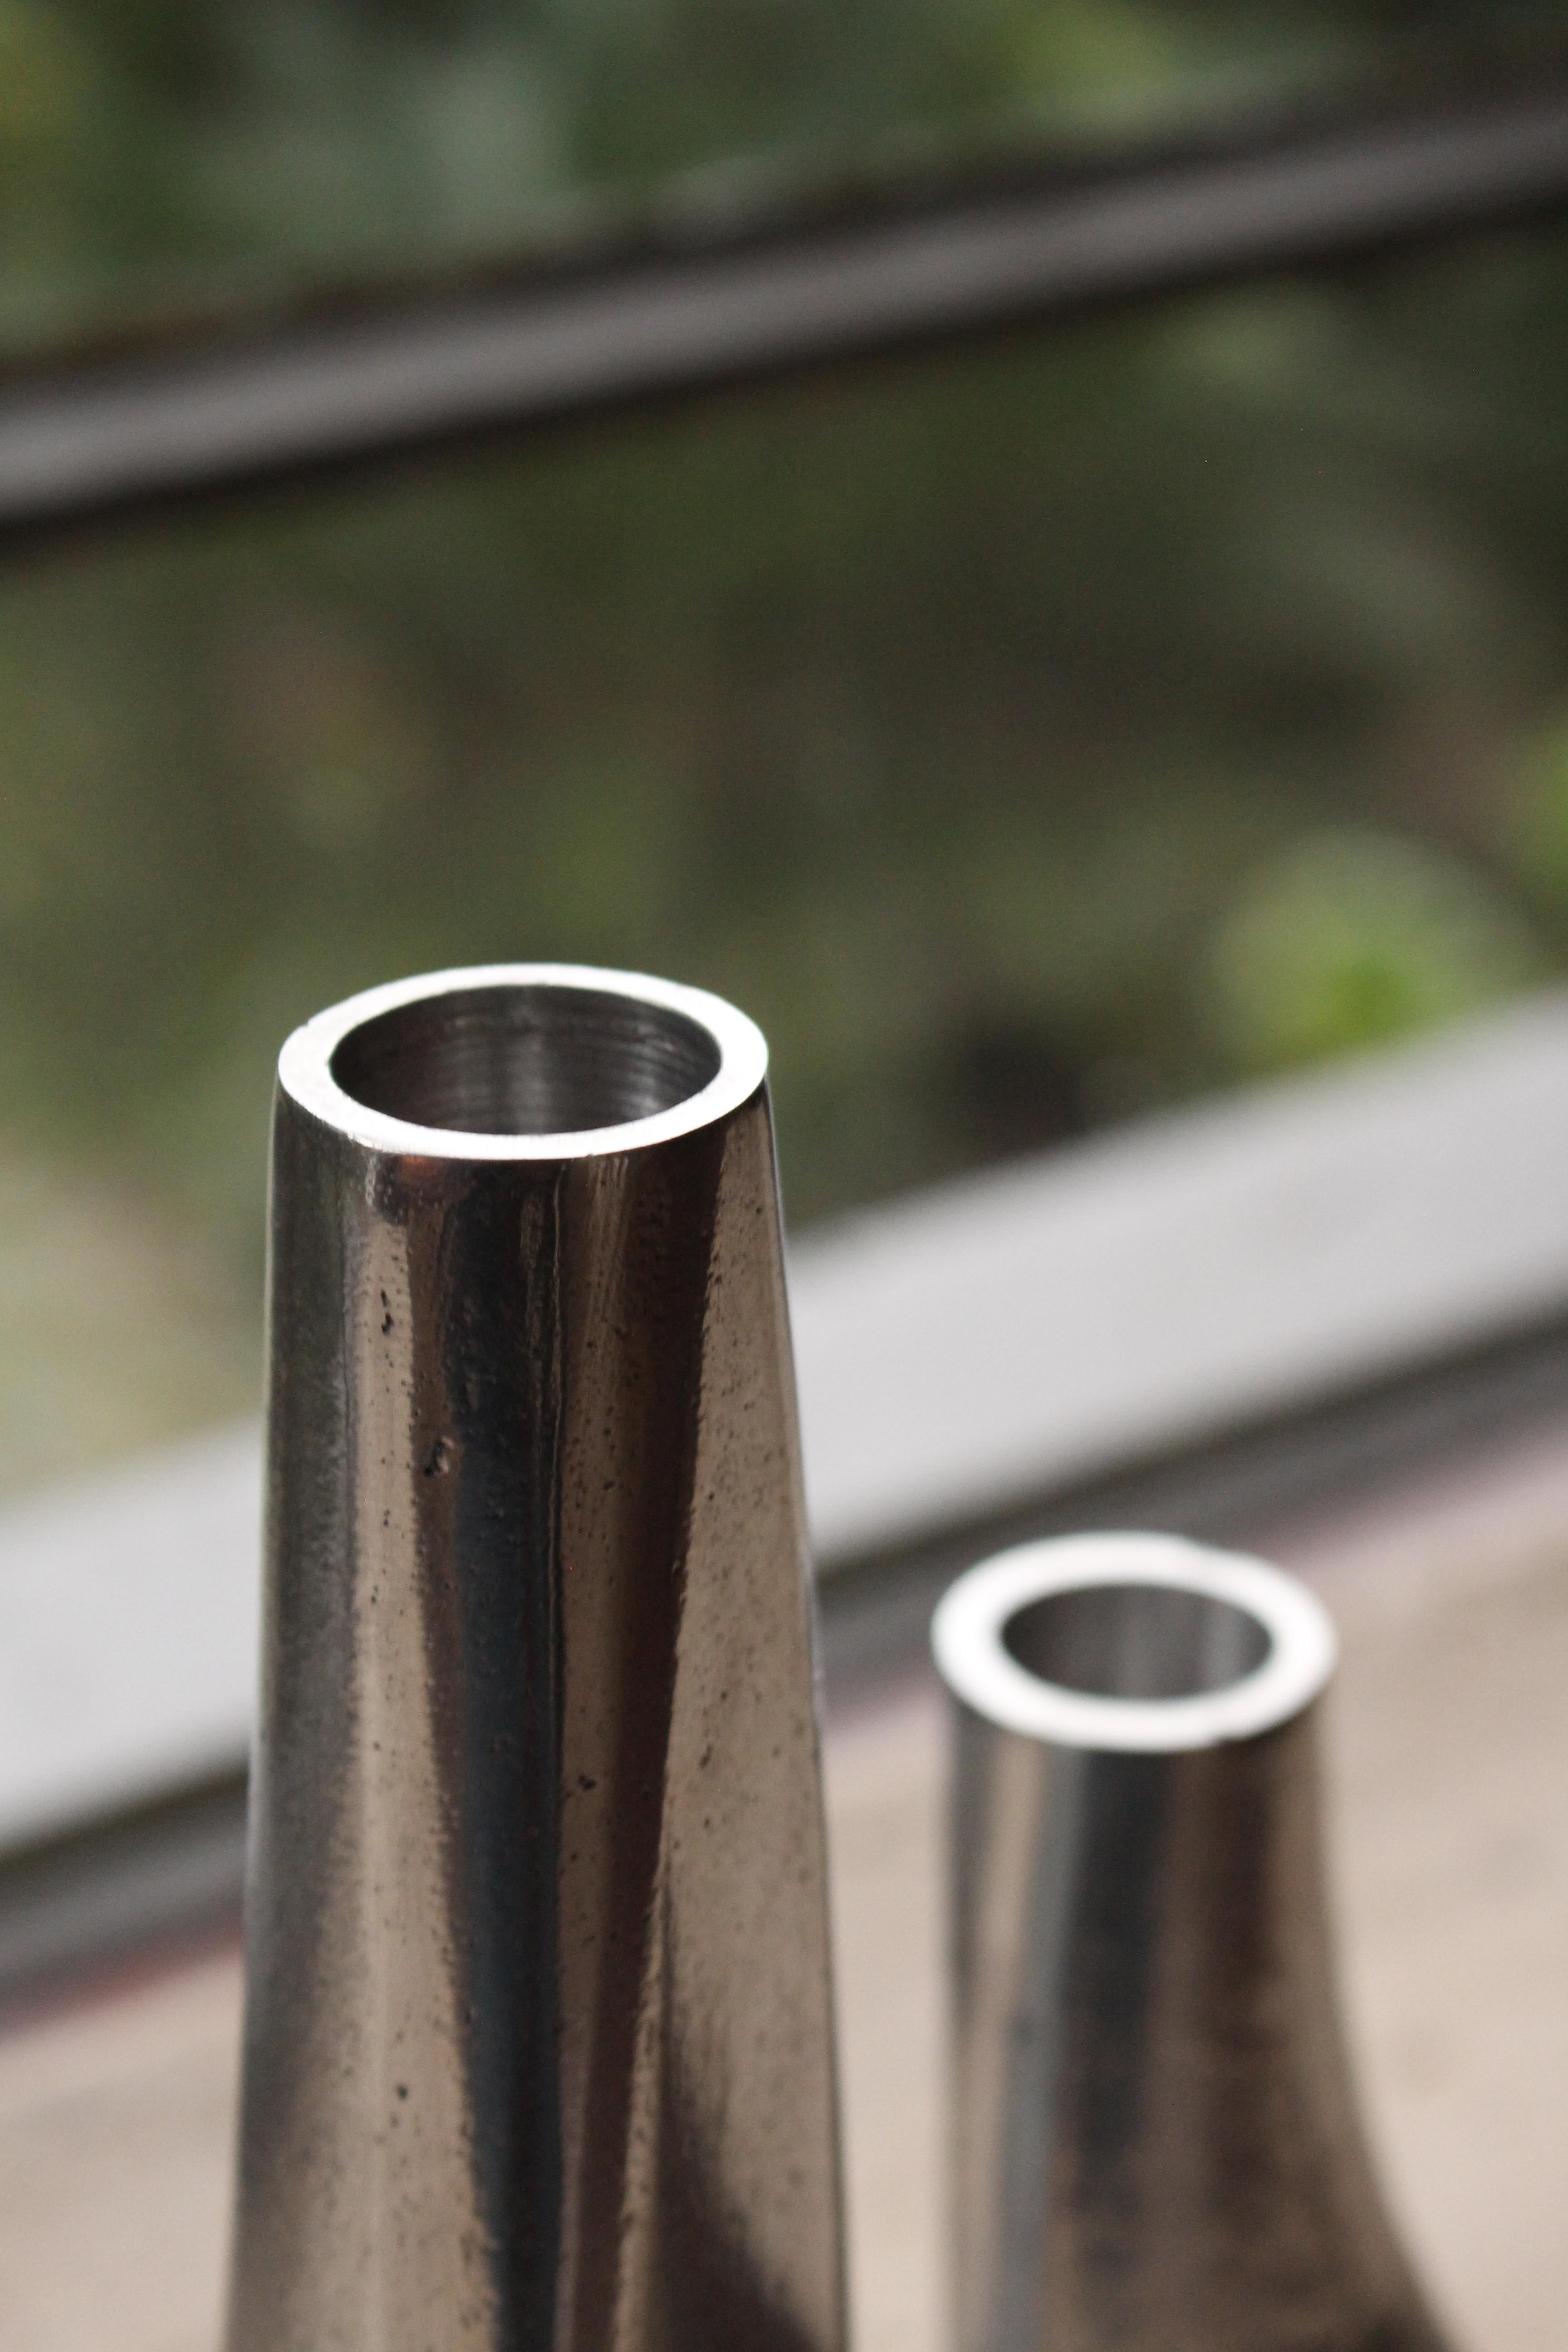 Âncora, designed by Christian Haas, is a dinner candleholder in sandcast aluminium. Its dual cavity form enables us to display the candleholder in two ways with a simple rotation. In one position, the height is greater than the other - this allows